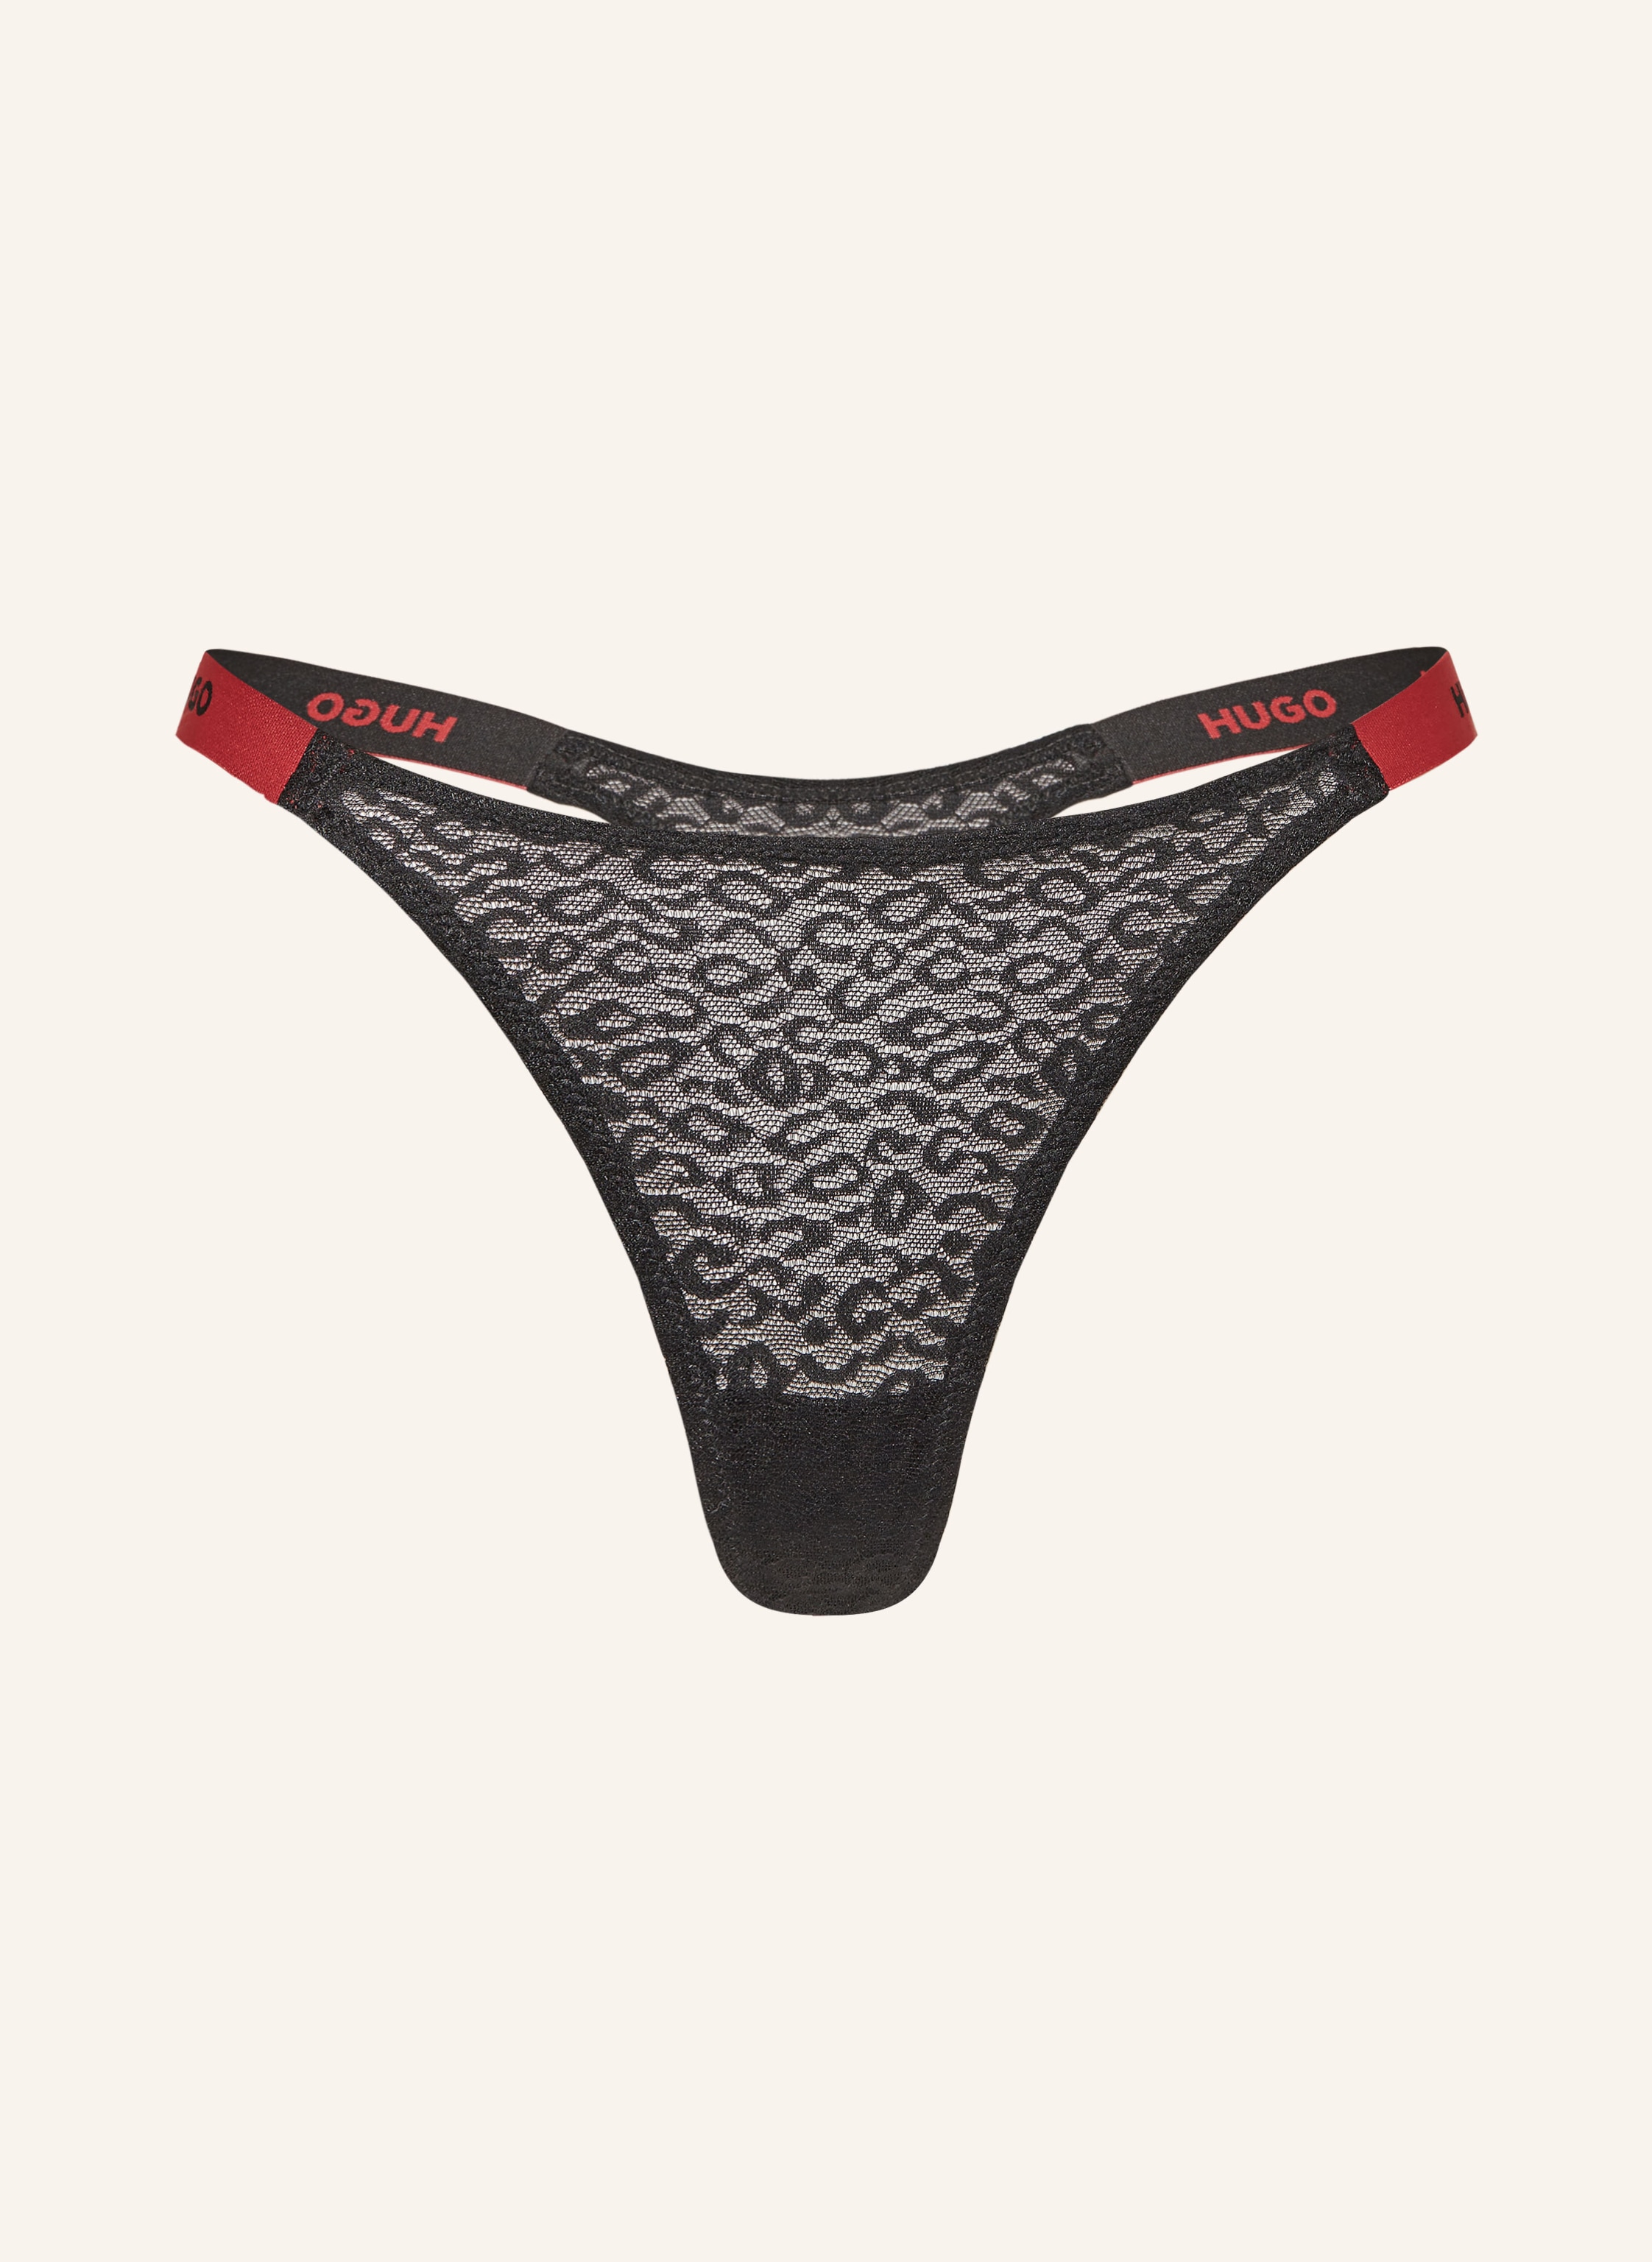 LACE black/ SPORTY in red HUGO Thong